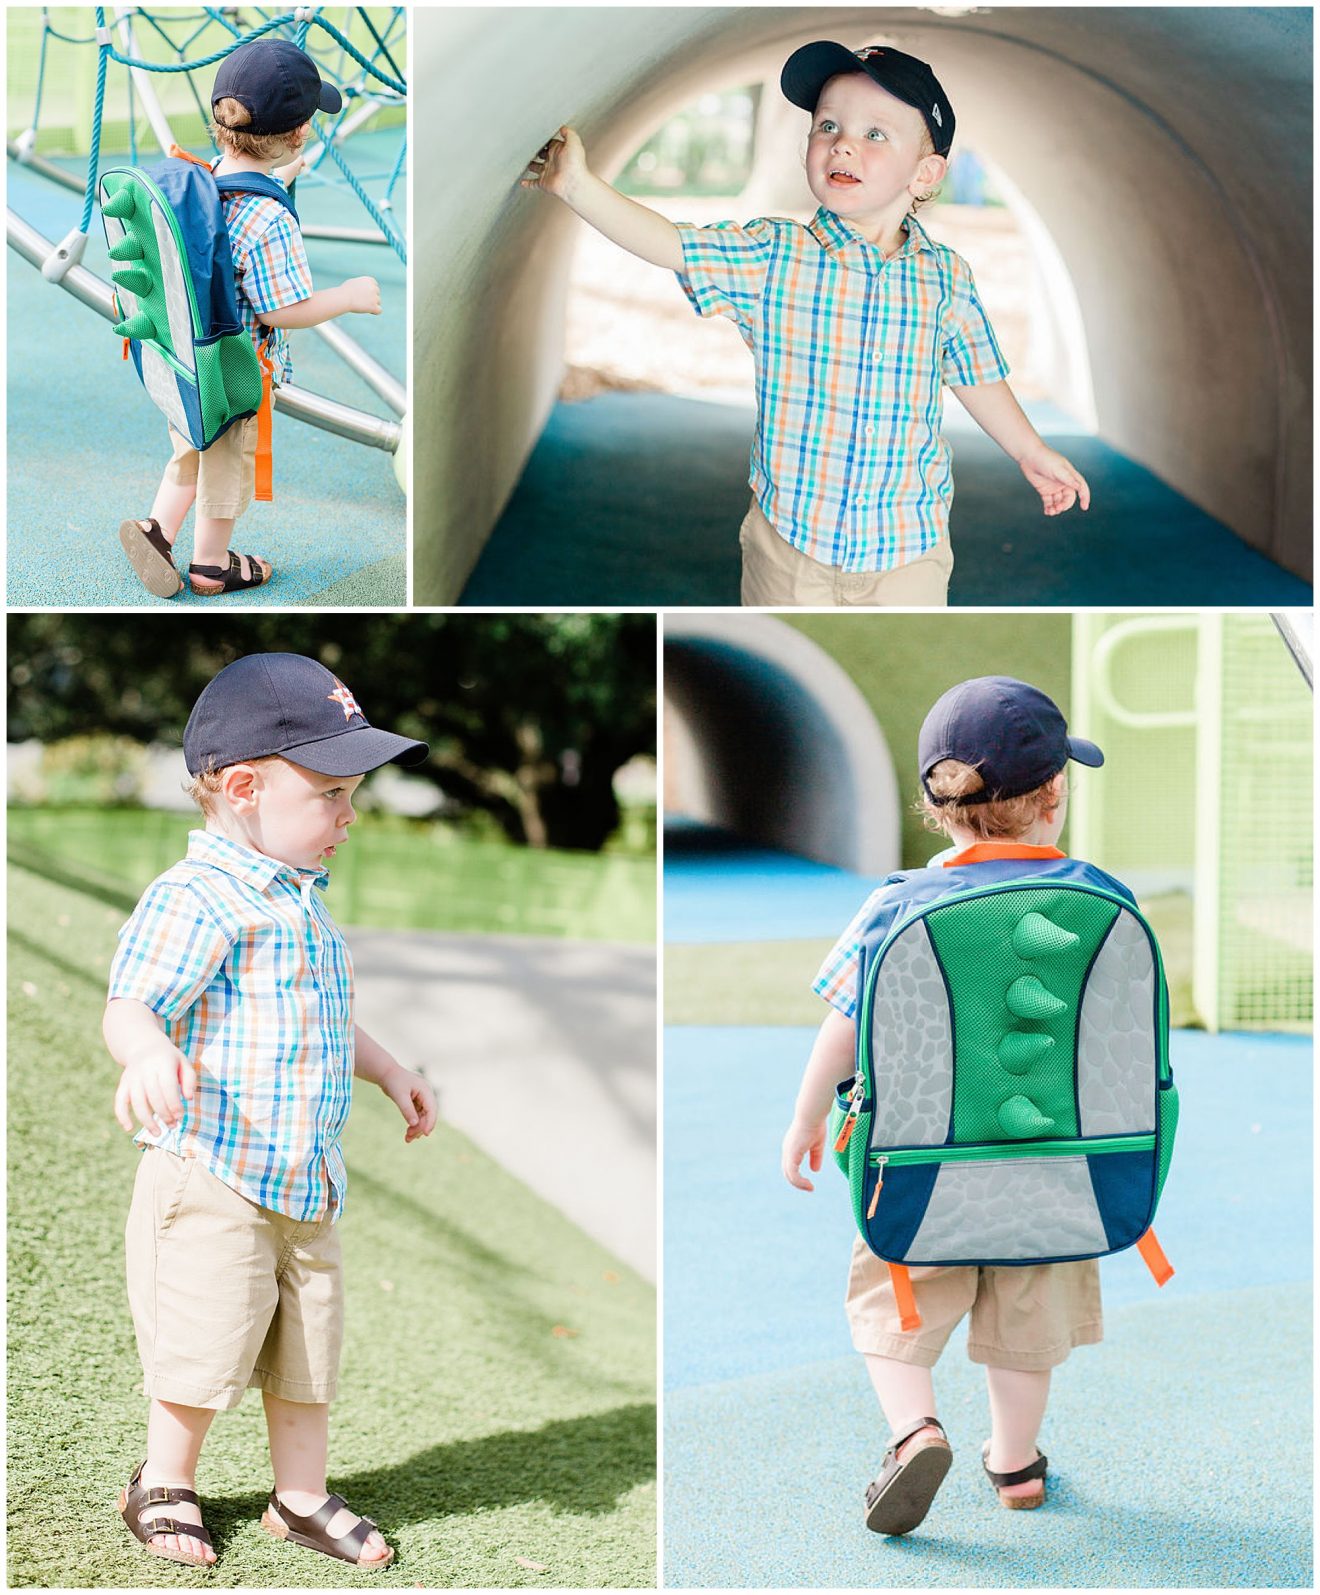 Toddler boy outside on the playground with his baseball cap and school backpack.